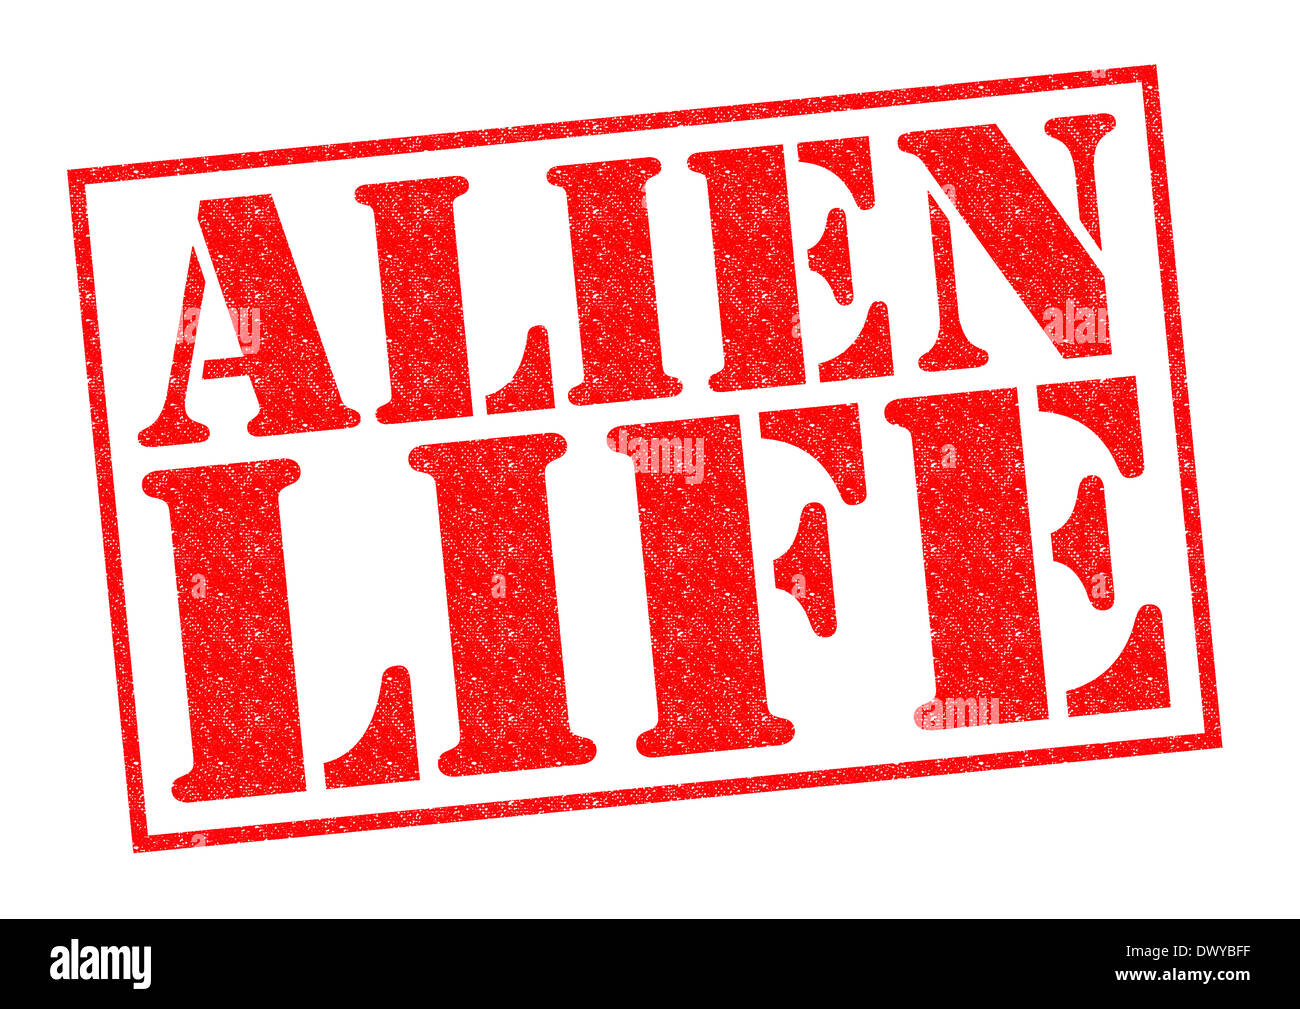 ALIEN LIFE red Rubber Stamp over a white background. Stock Photo